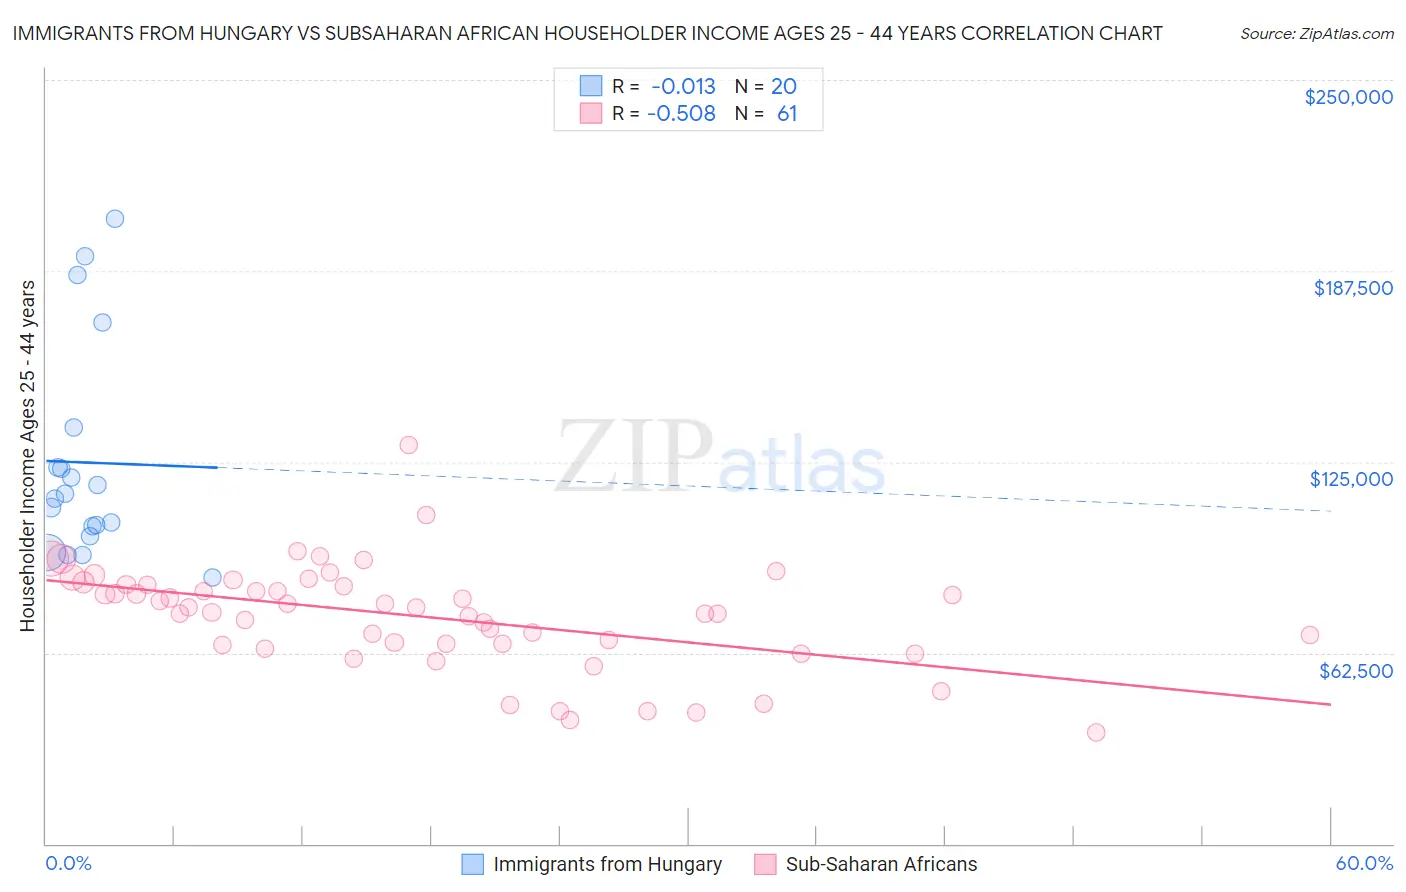 Immigrants from Hungary vs Subsaharan African Householder Income Ages 25 - 44 years